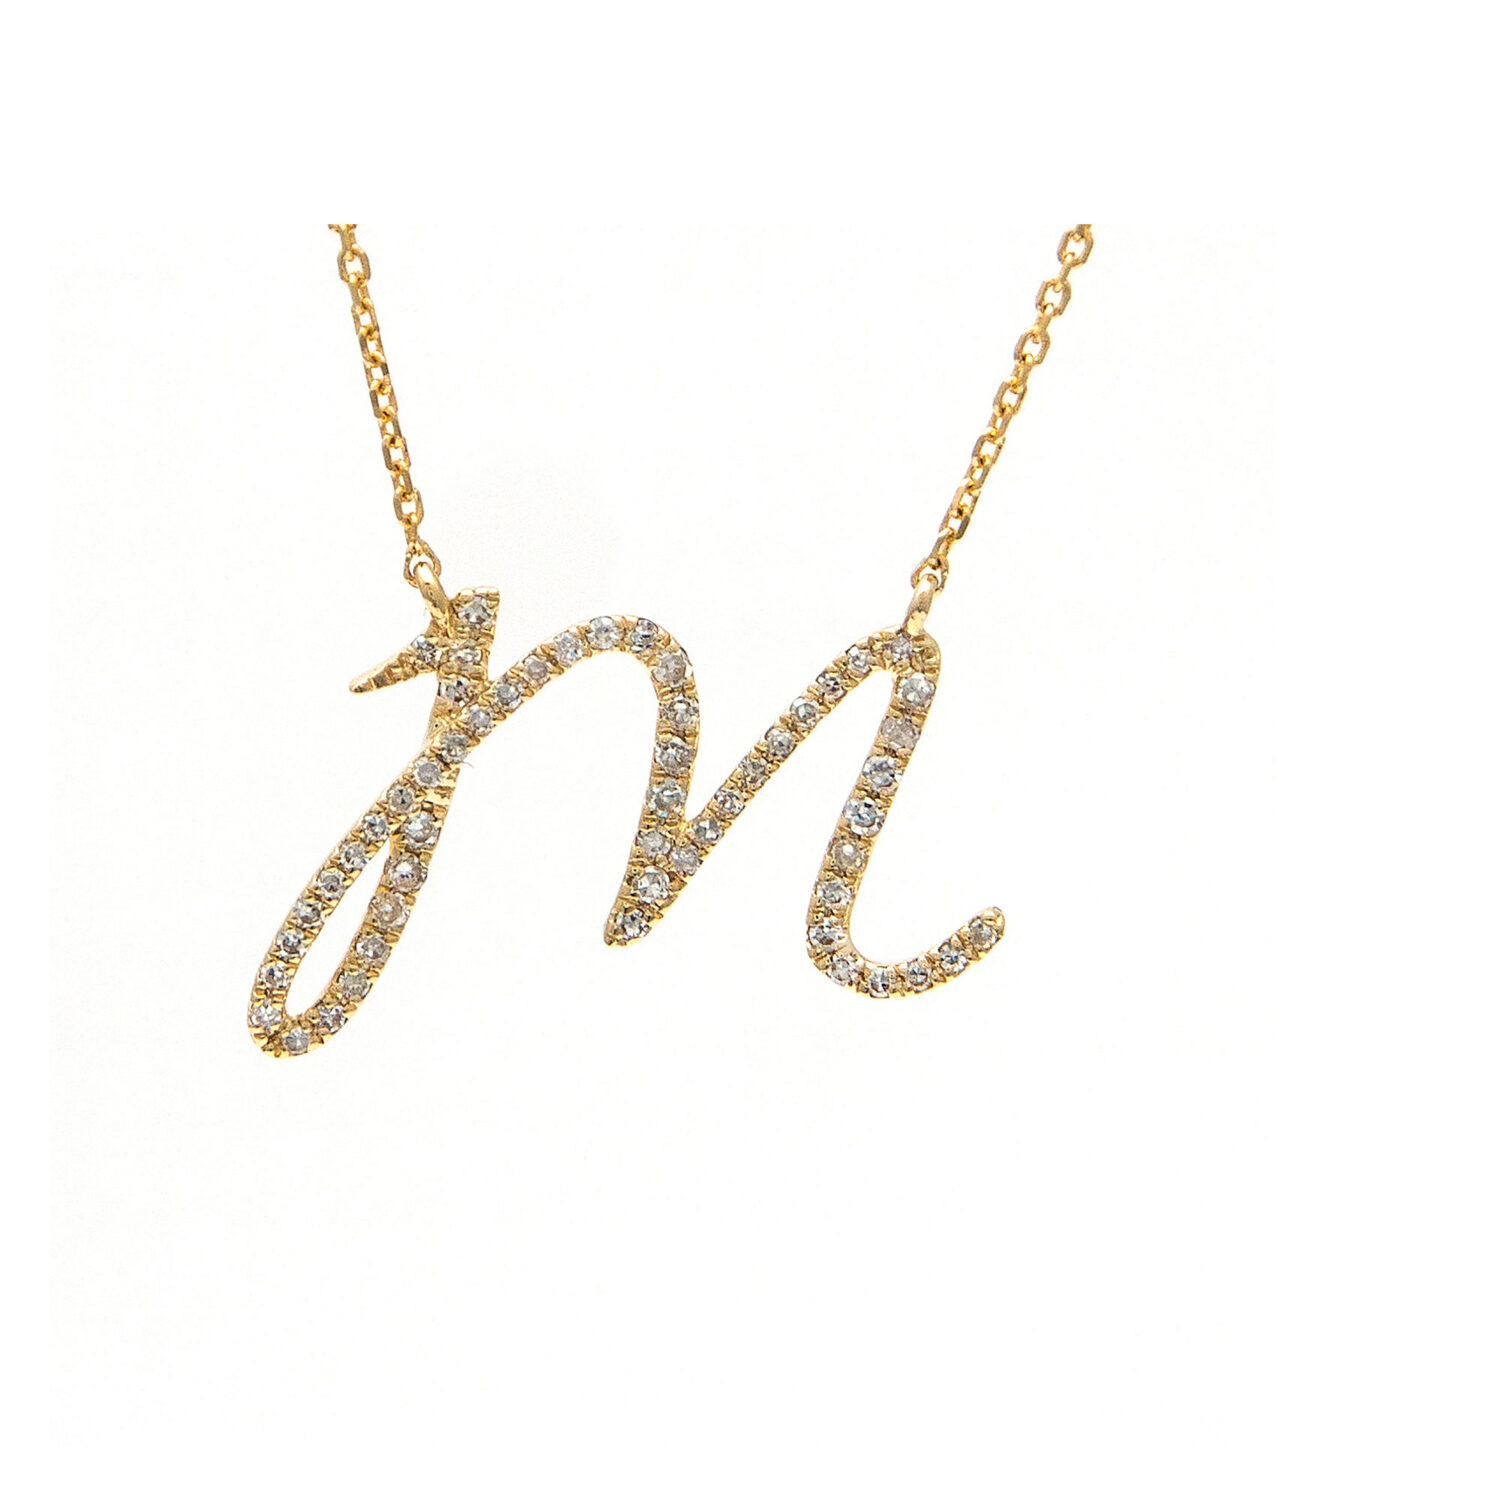 18K YELLOW GOLD TINY TREASURES SCRIPT INITIAL 'M' NECKLACE - Roberto Coin -  North America